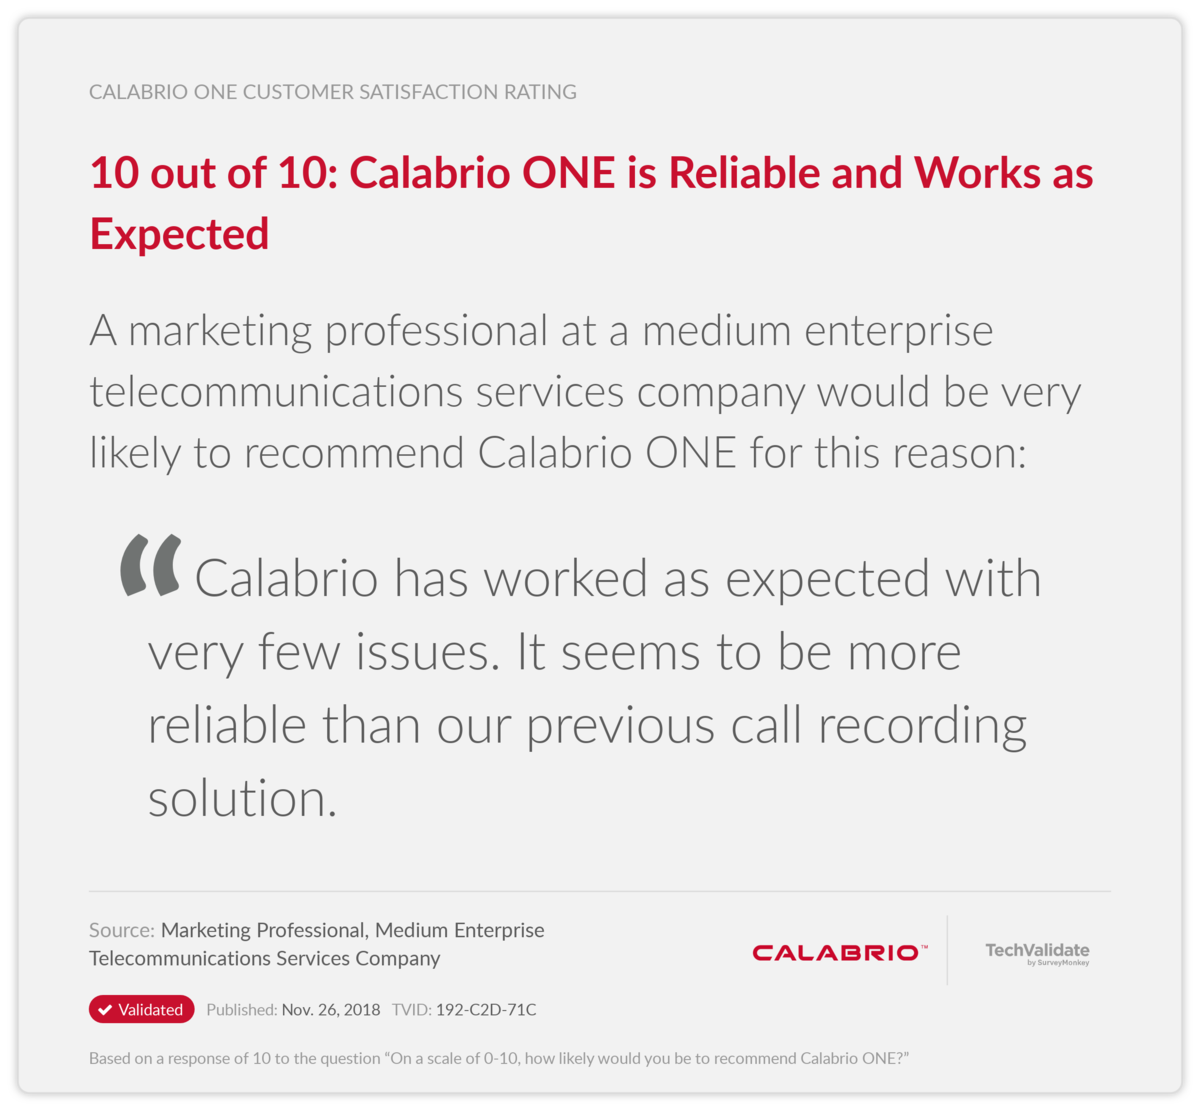 10 out of 10: Calabrio ONE is Reliable and Works as Expected